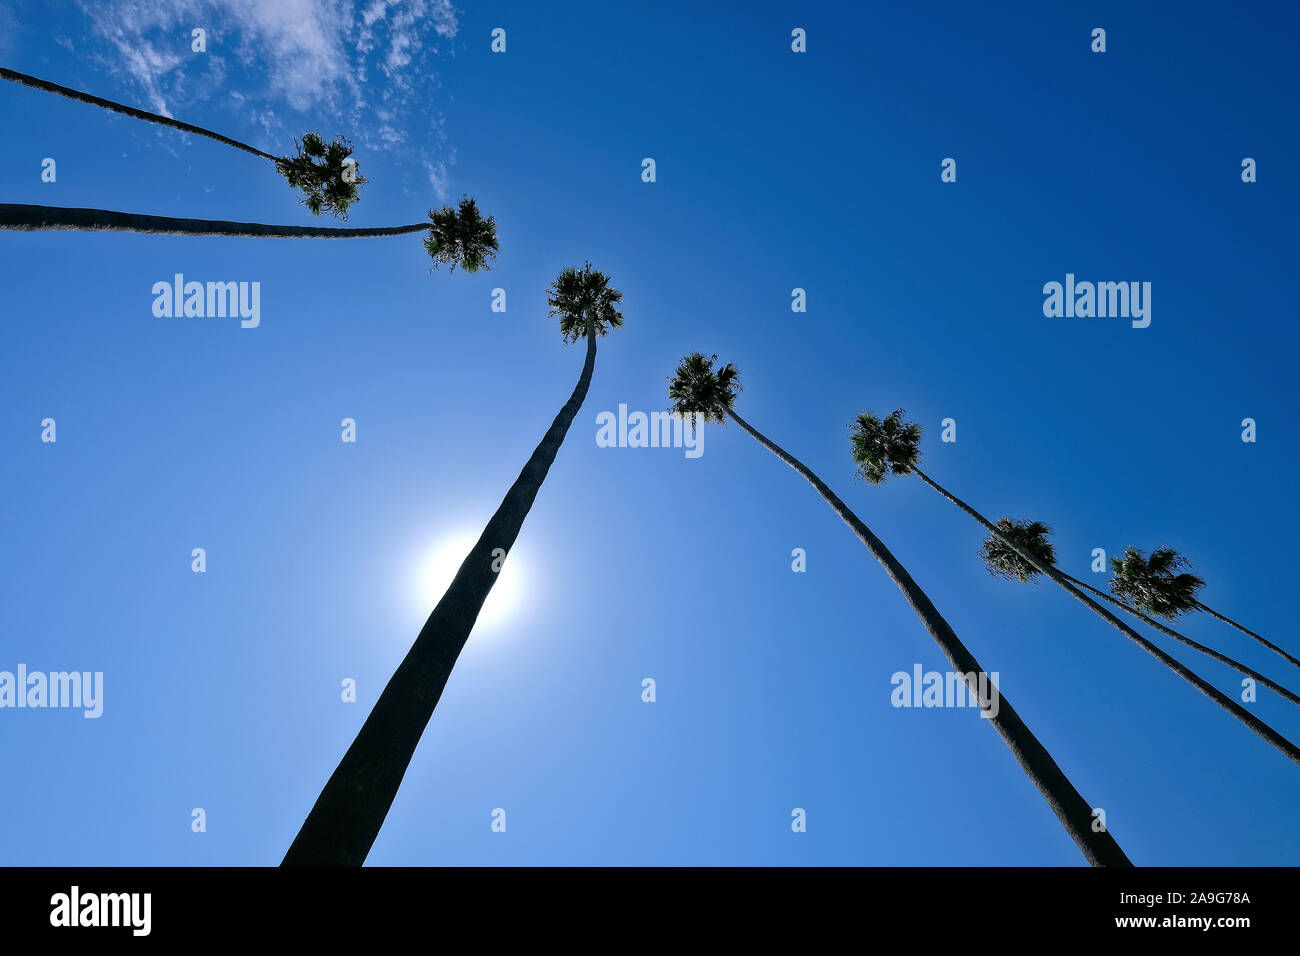 Palm trees and sun in front of blue sky in Santa Barbara, California, USA Stock Photo